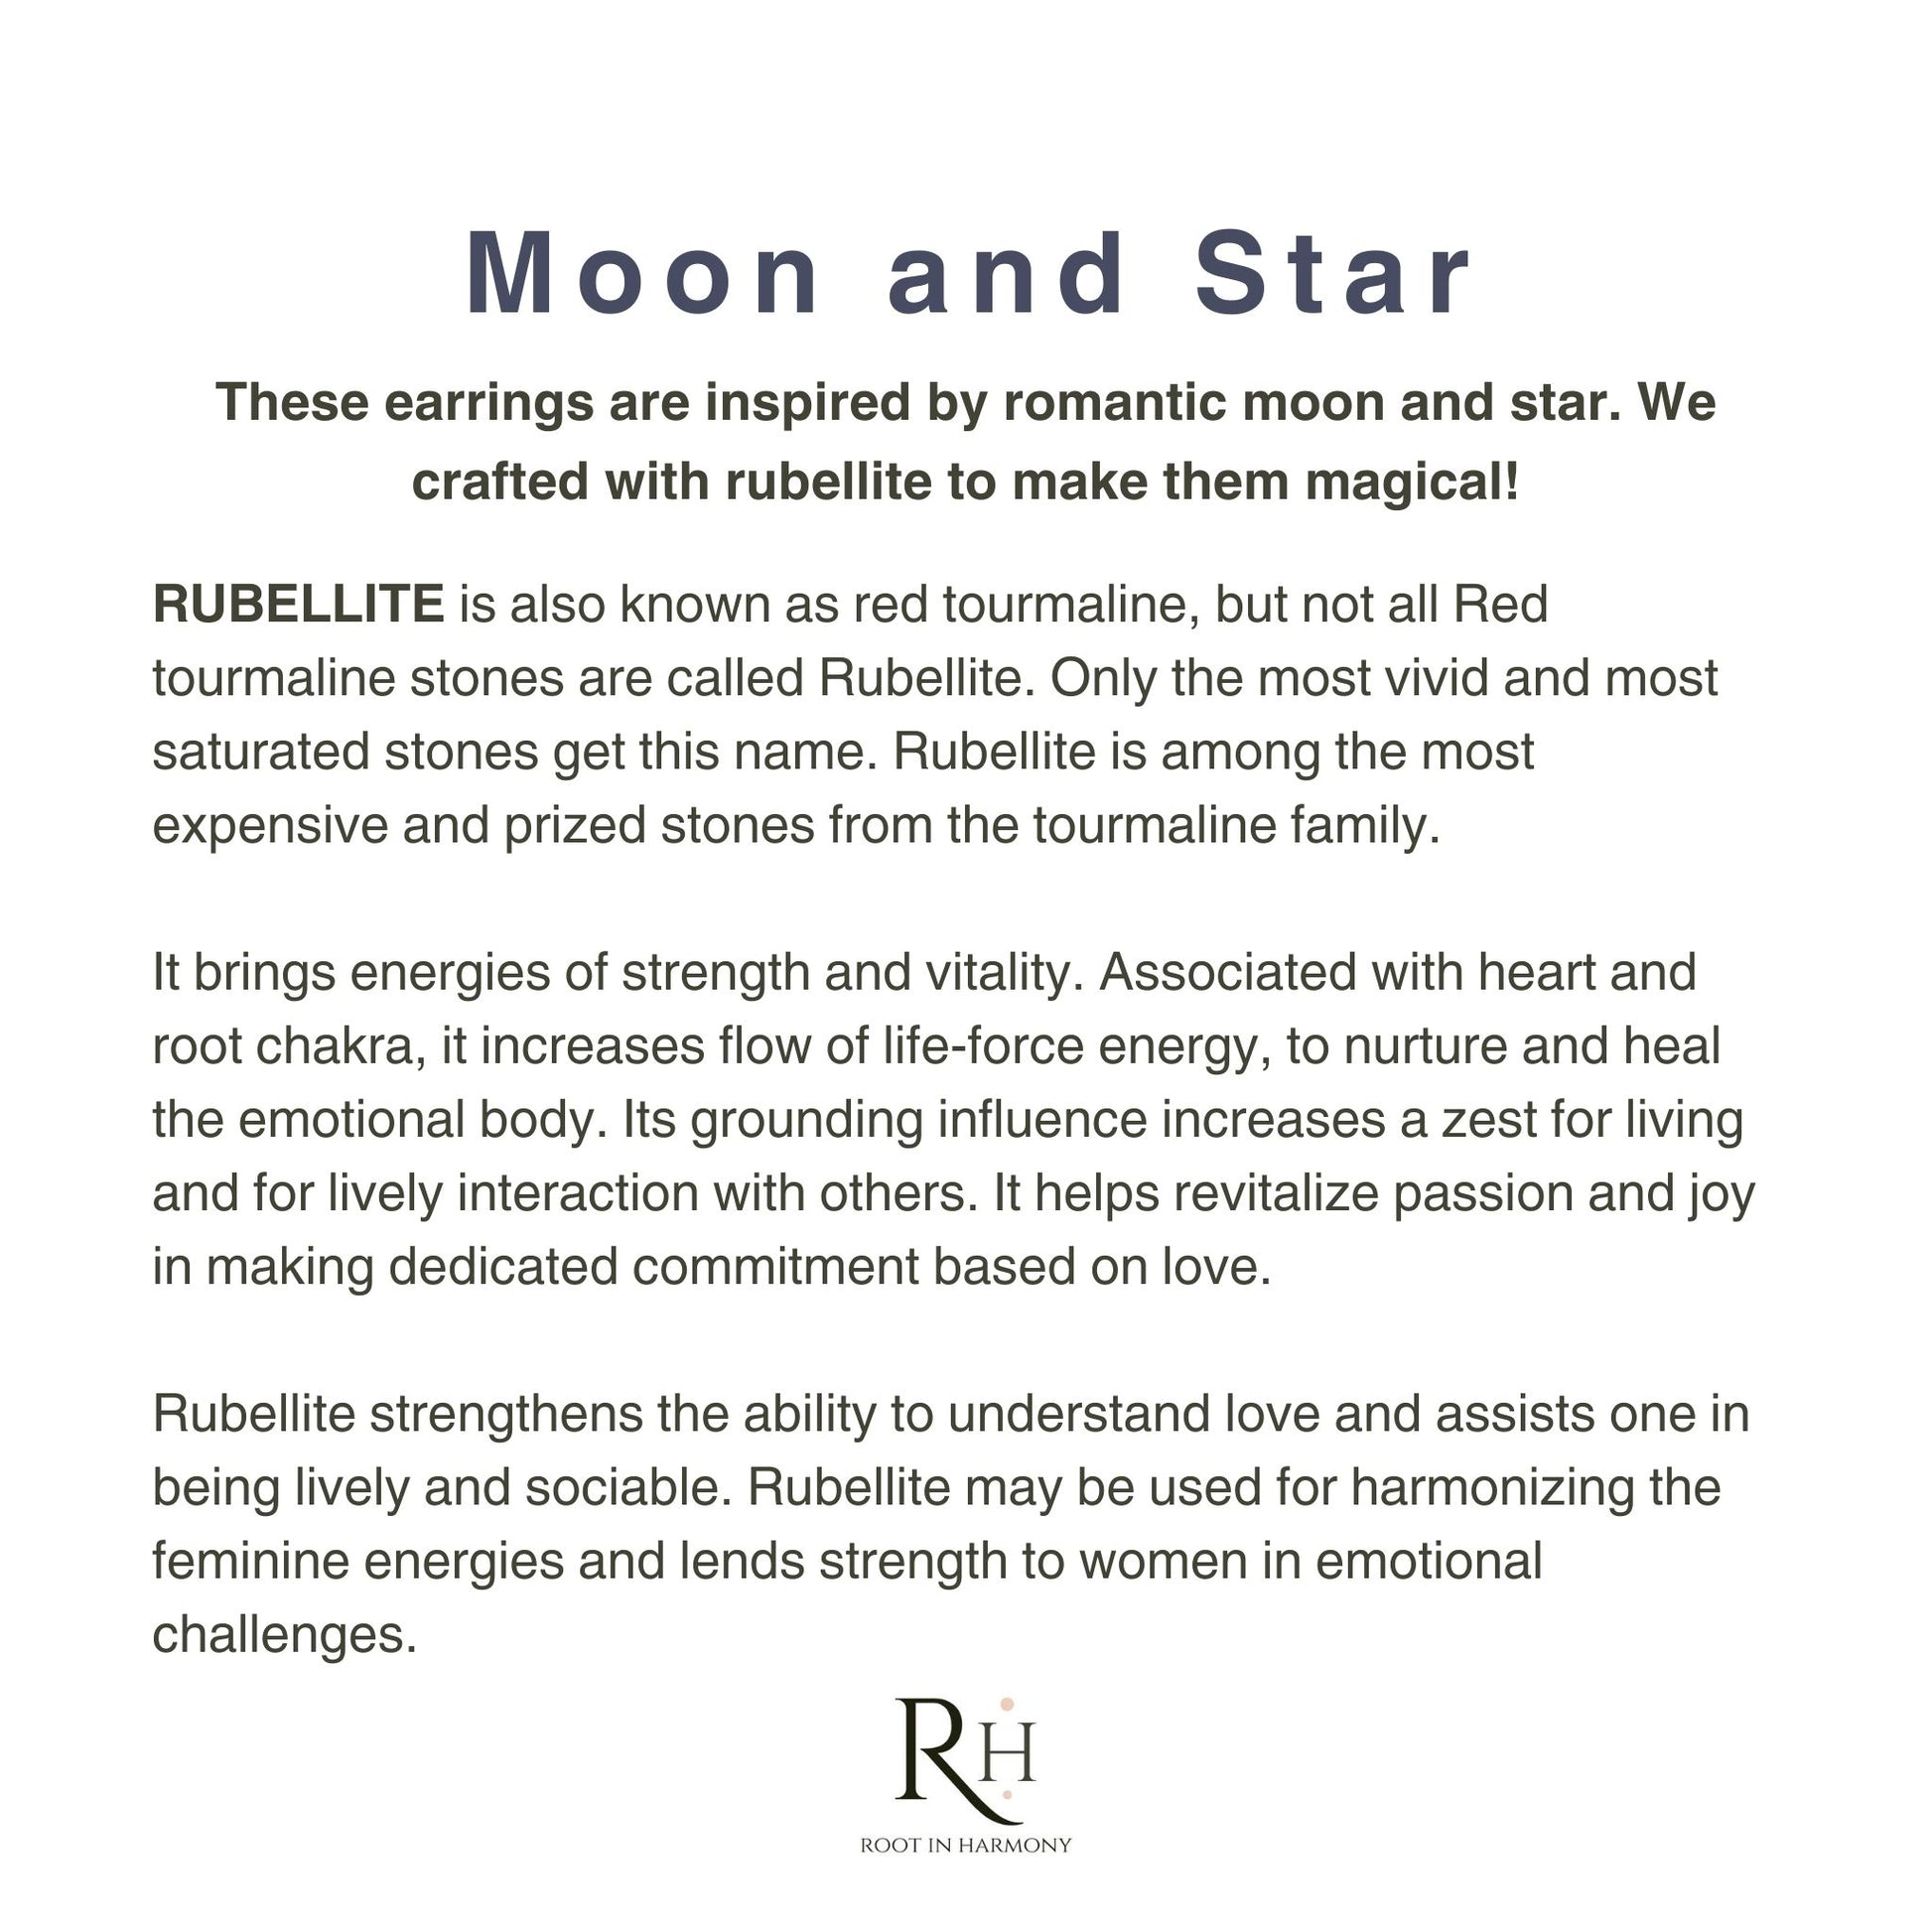 Rubellite meaning